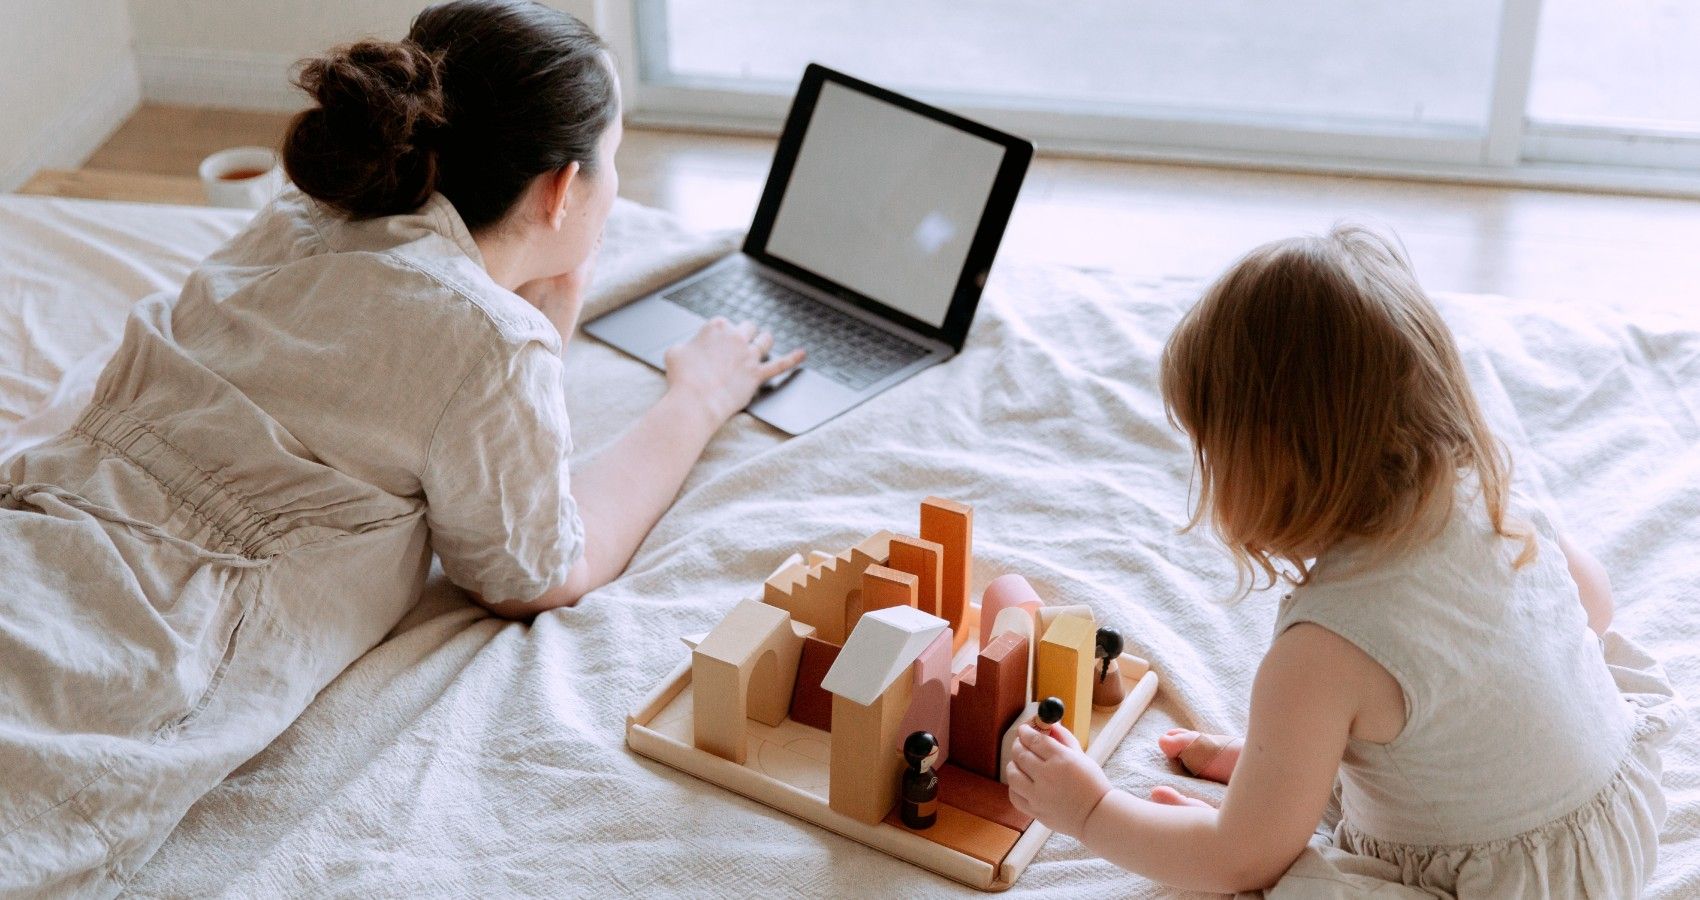 A Mother On Her Computer While Her Daughter PLay